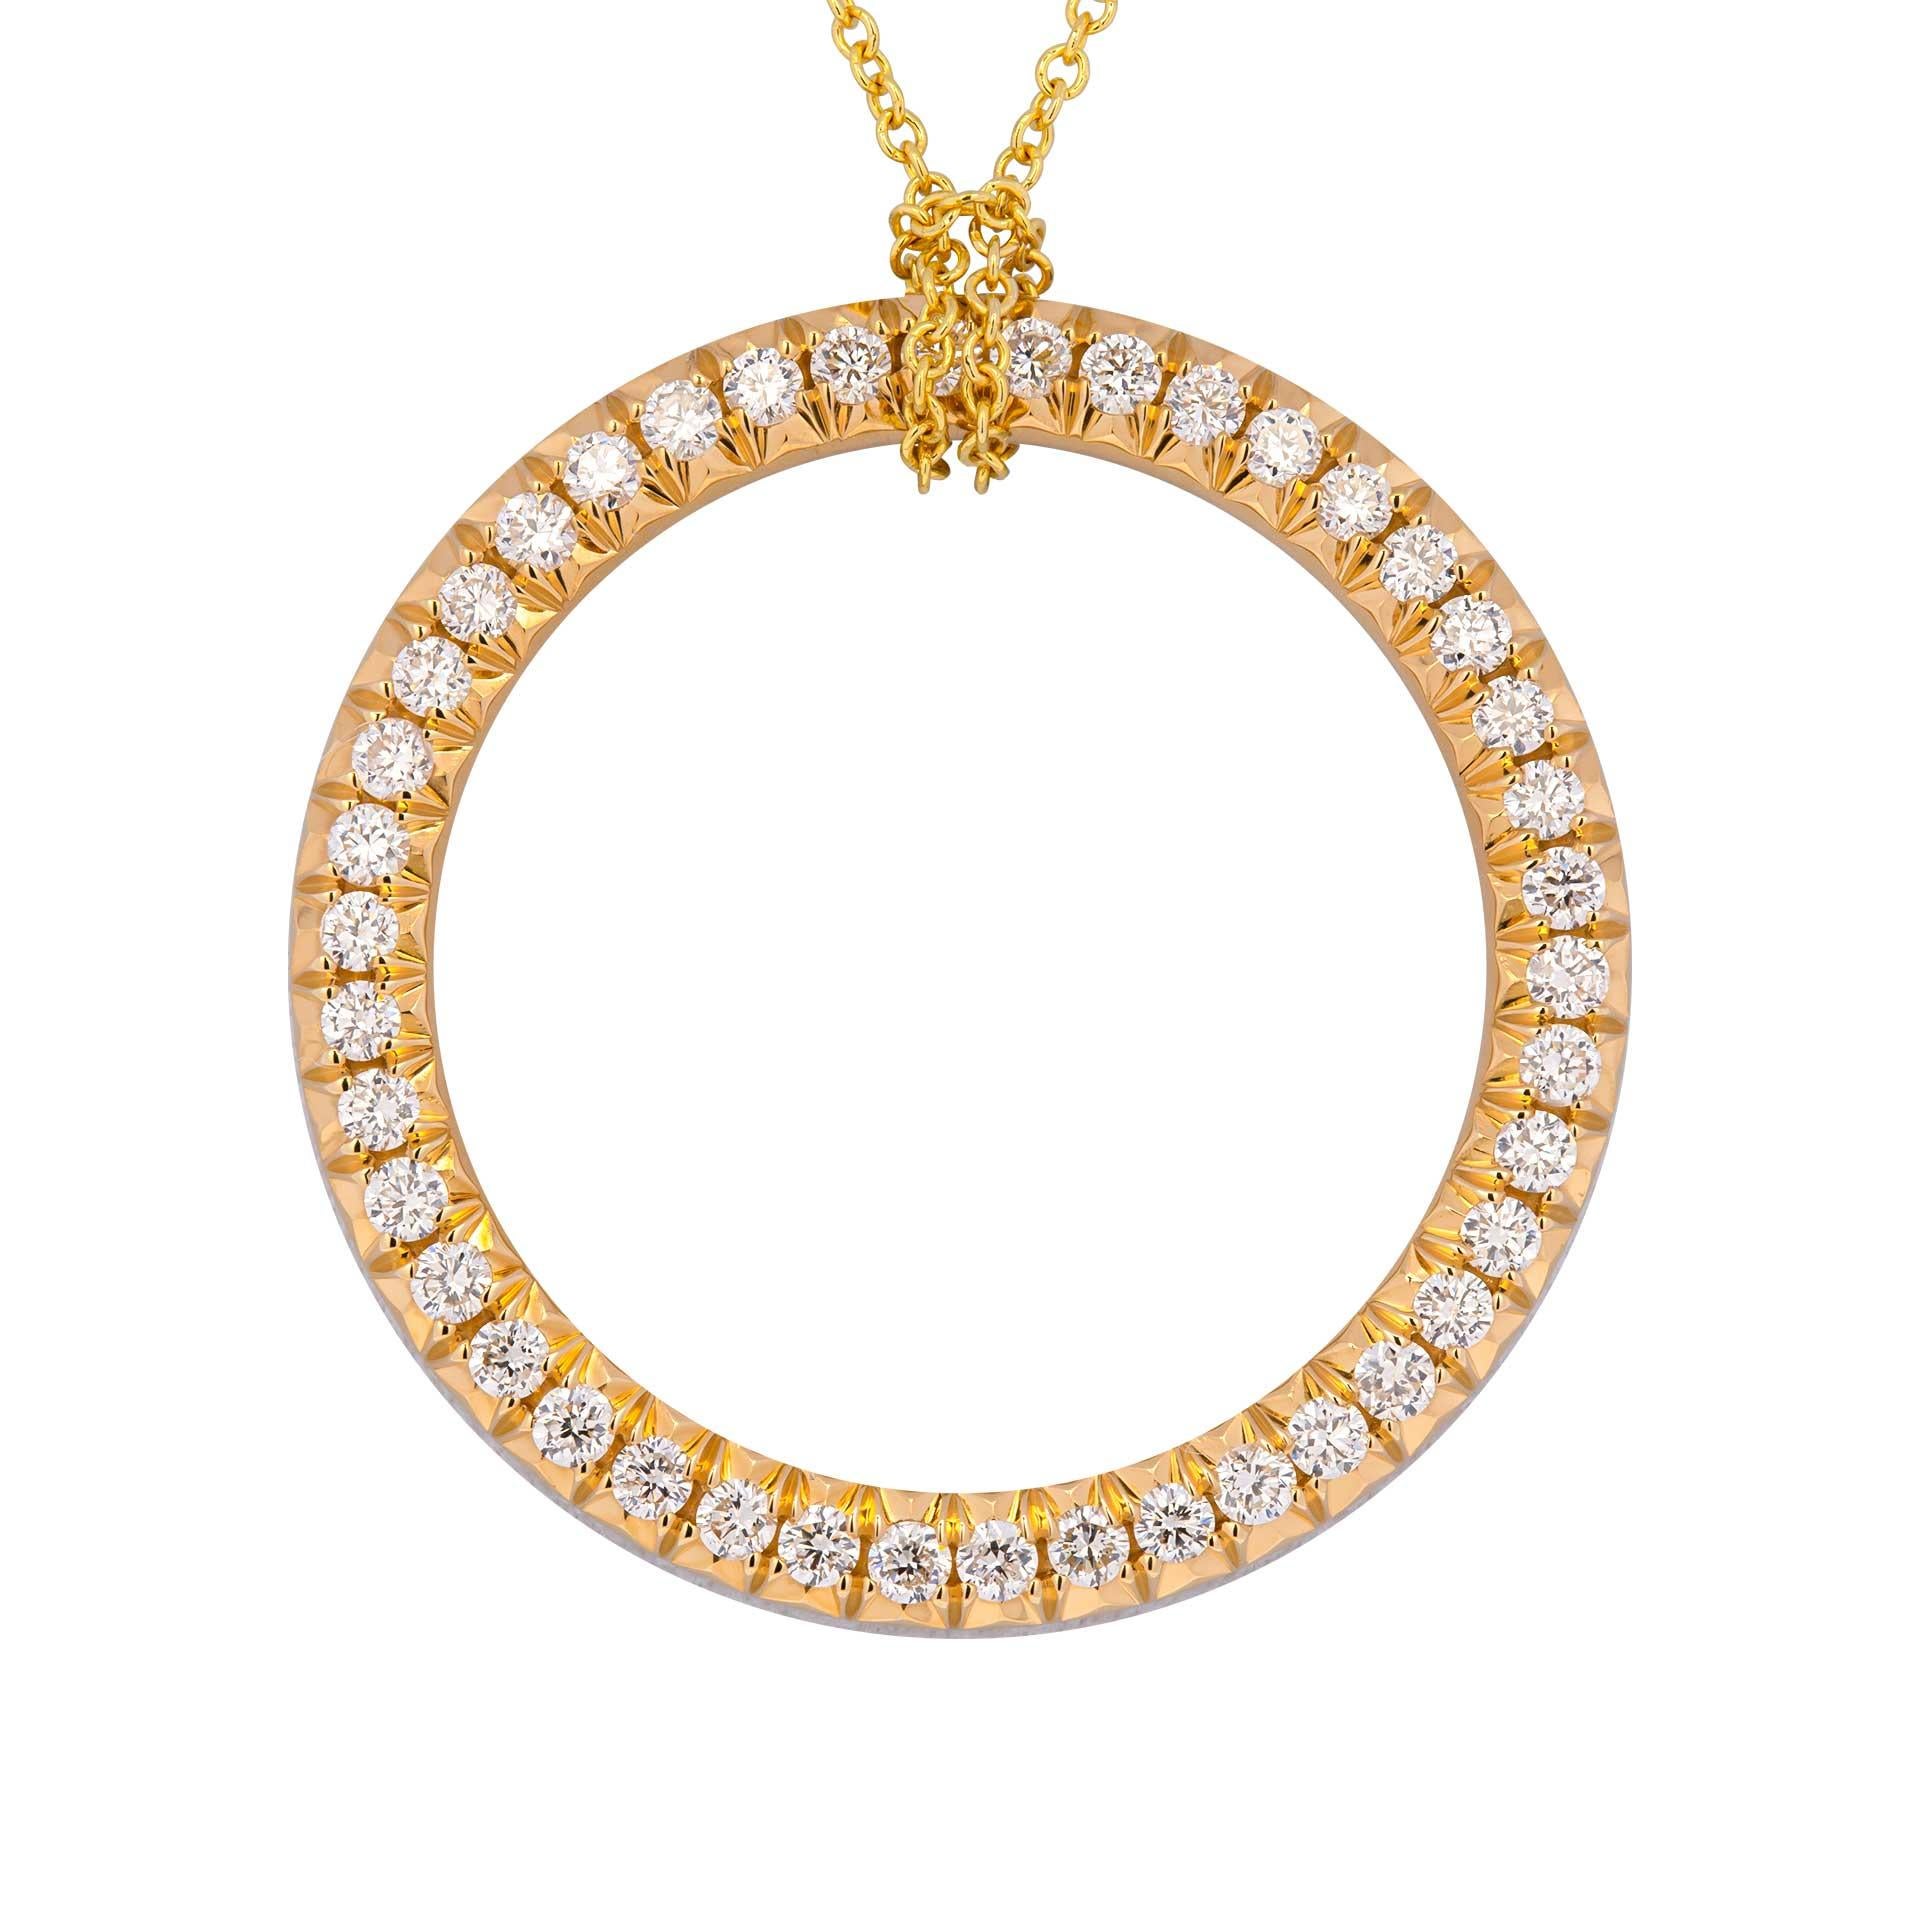 Diamond Circle of Life Necklace
Mounted in 18k Yellow Gold
This open circle pendant, encrusted with 42 round brilliant diamonds set in 18K yellow gold, is a gorgeous example of a classic motif symbolizing eternity and never, ending love. It's 1-inch